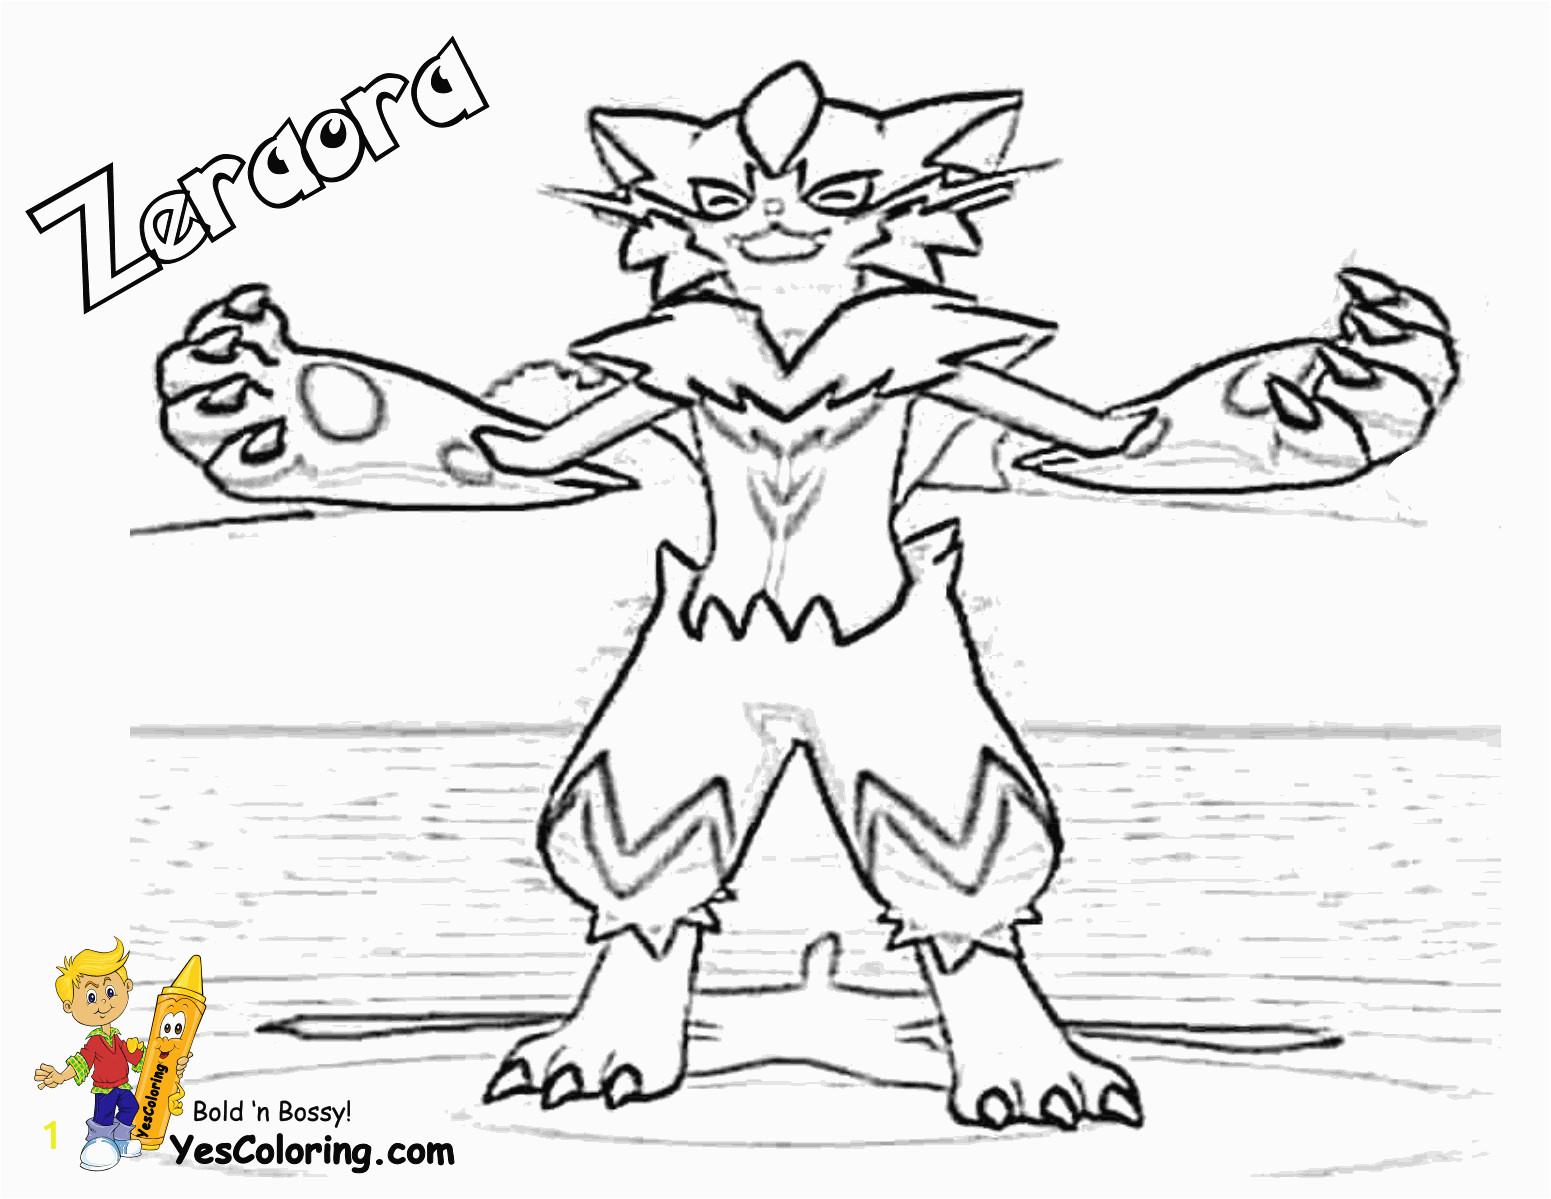 807 Zeraora pokemon coloring page at yescoloring